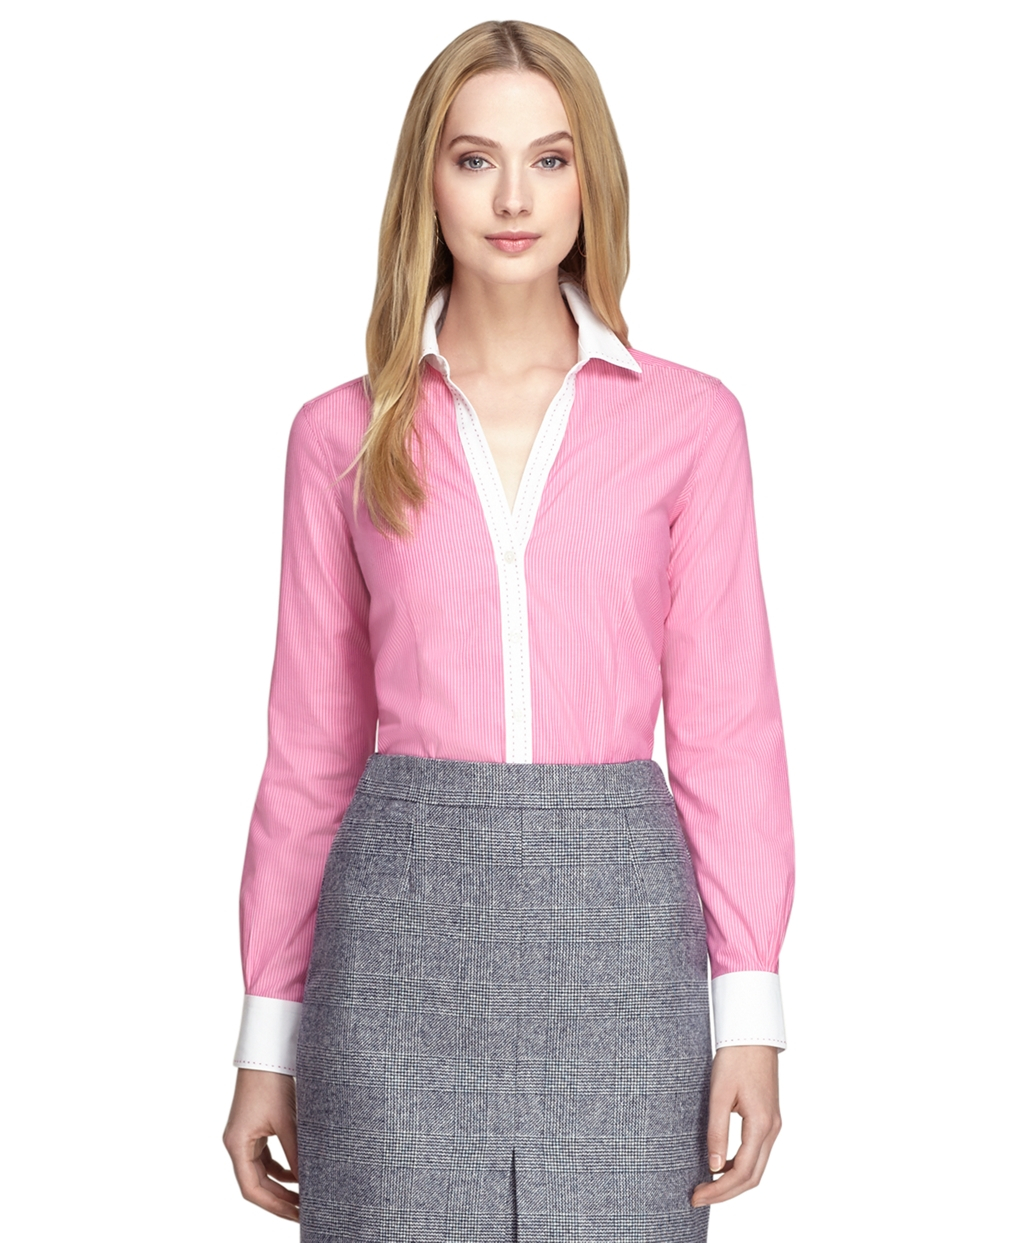 Lyst - Brooks Brothers Noniron Fitted Pinstripe Dress Shirt in Pink